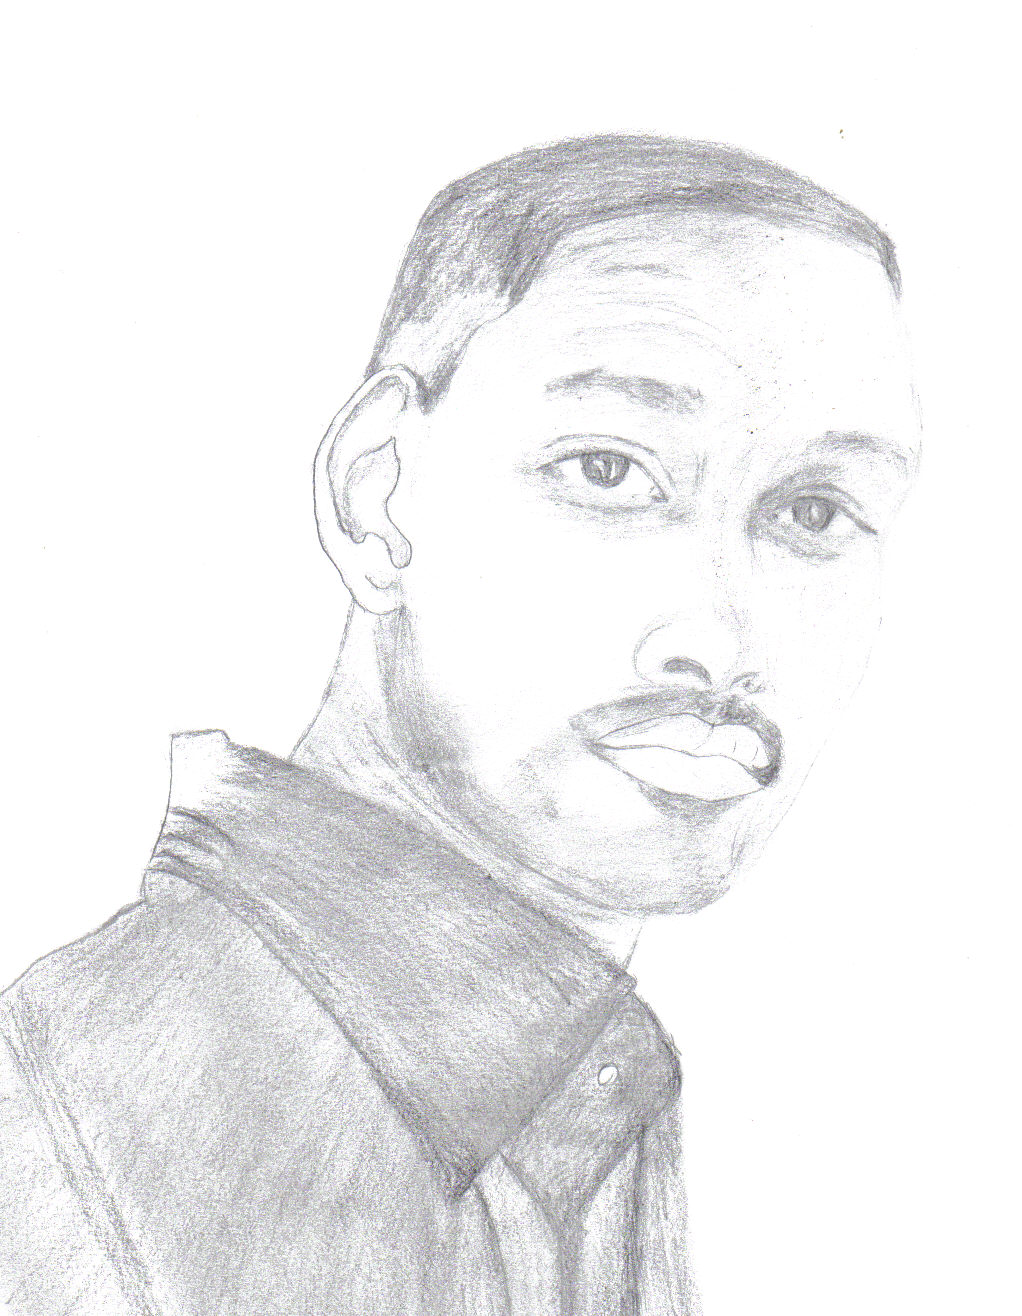 Will Smith by Coco50